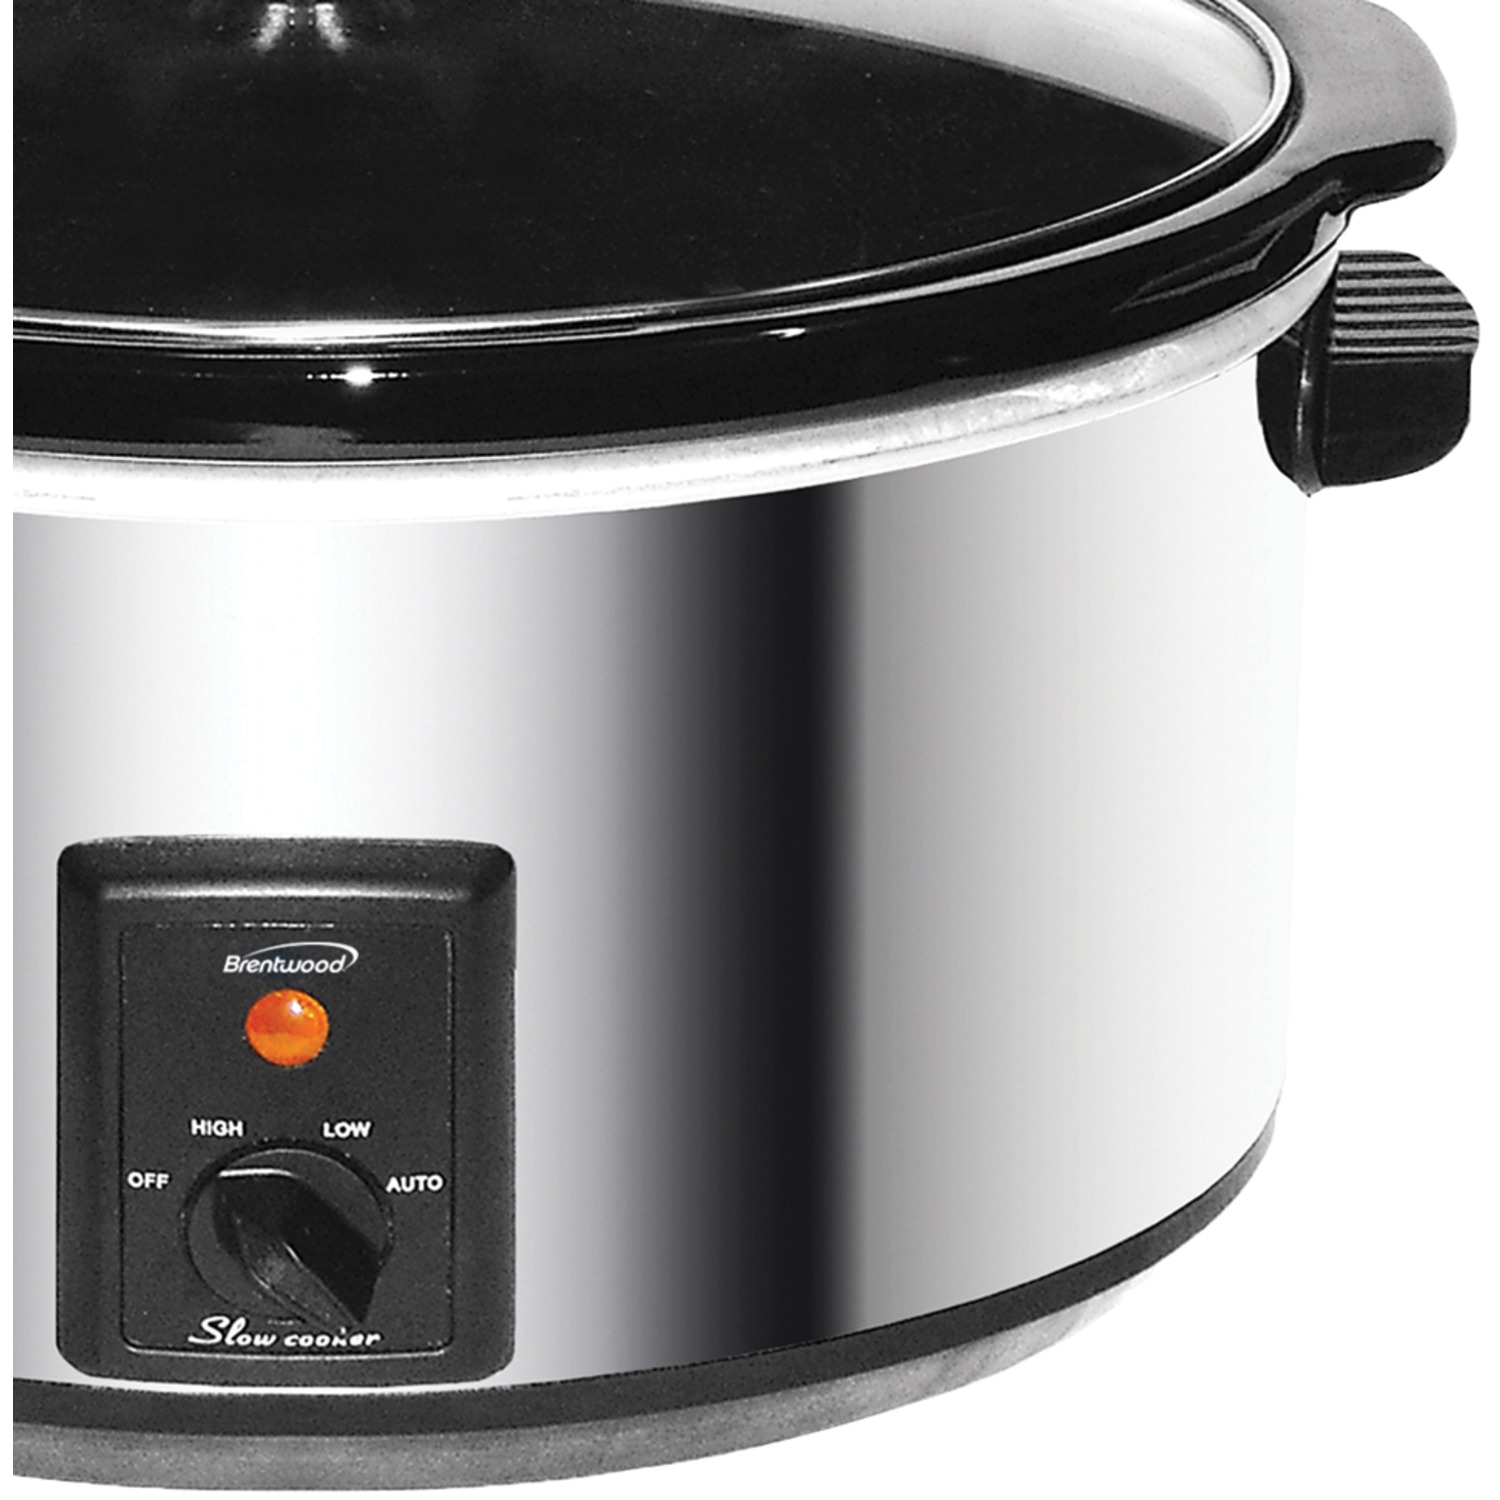 Brentwood SC-170S 8 Qt Slow Cooker Stainless Steel - image 5 of 8